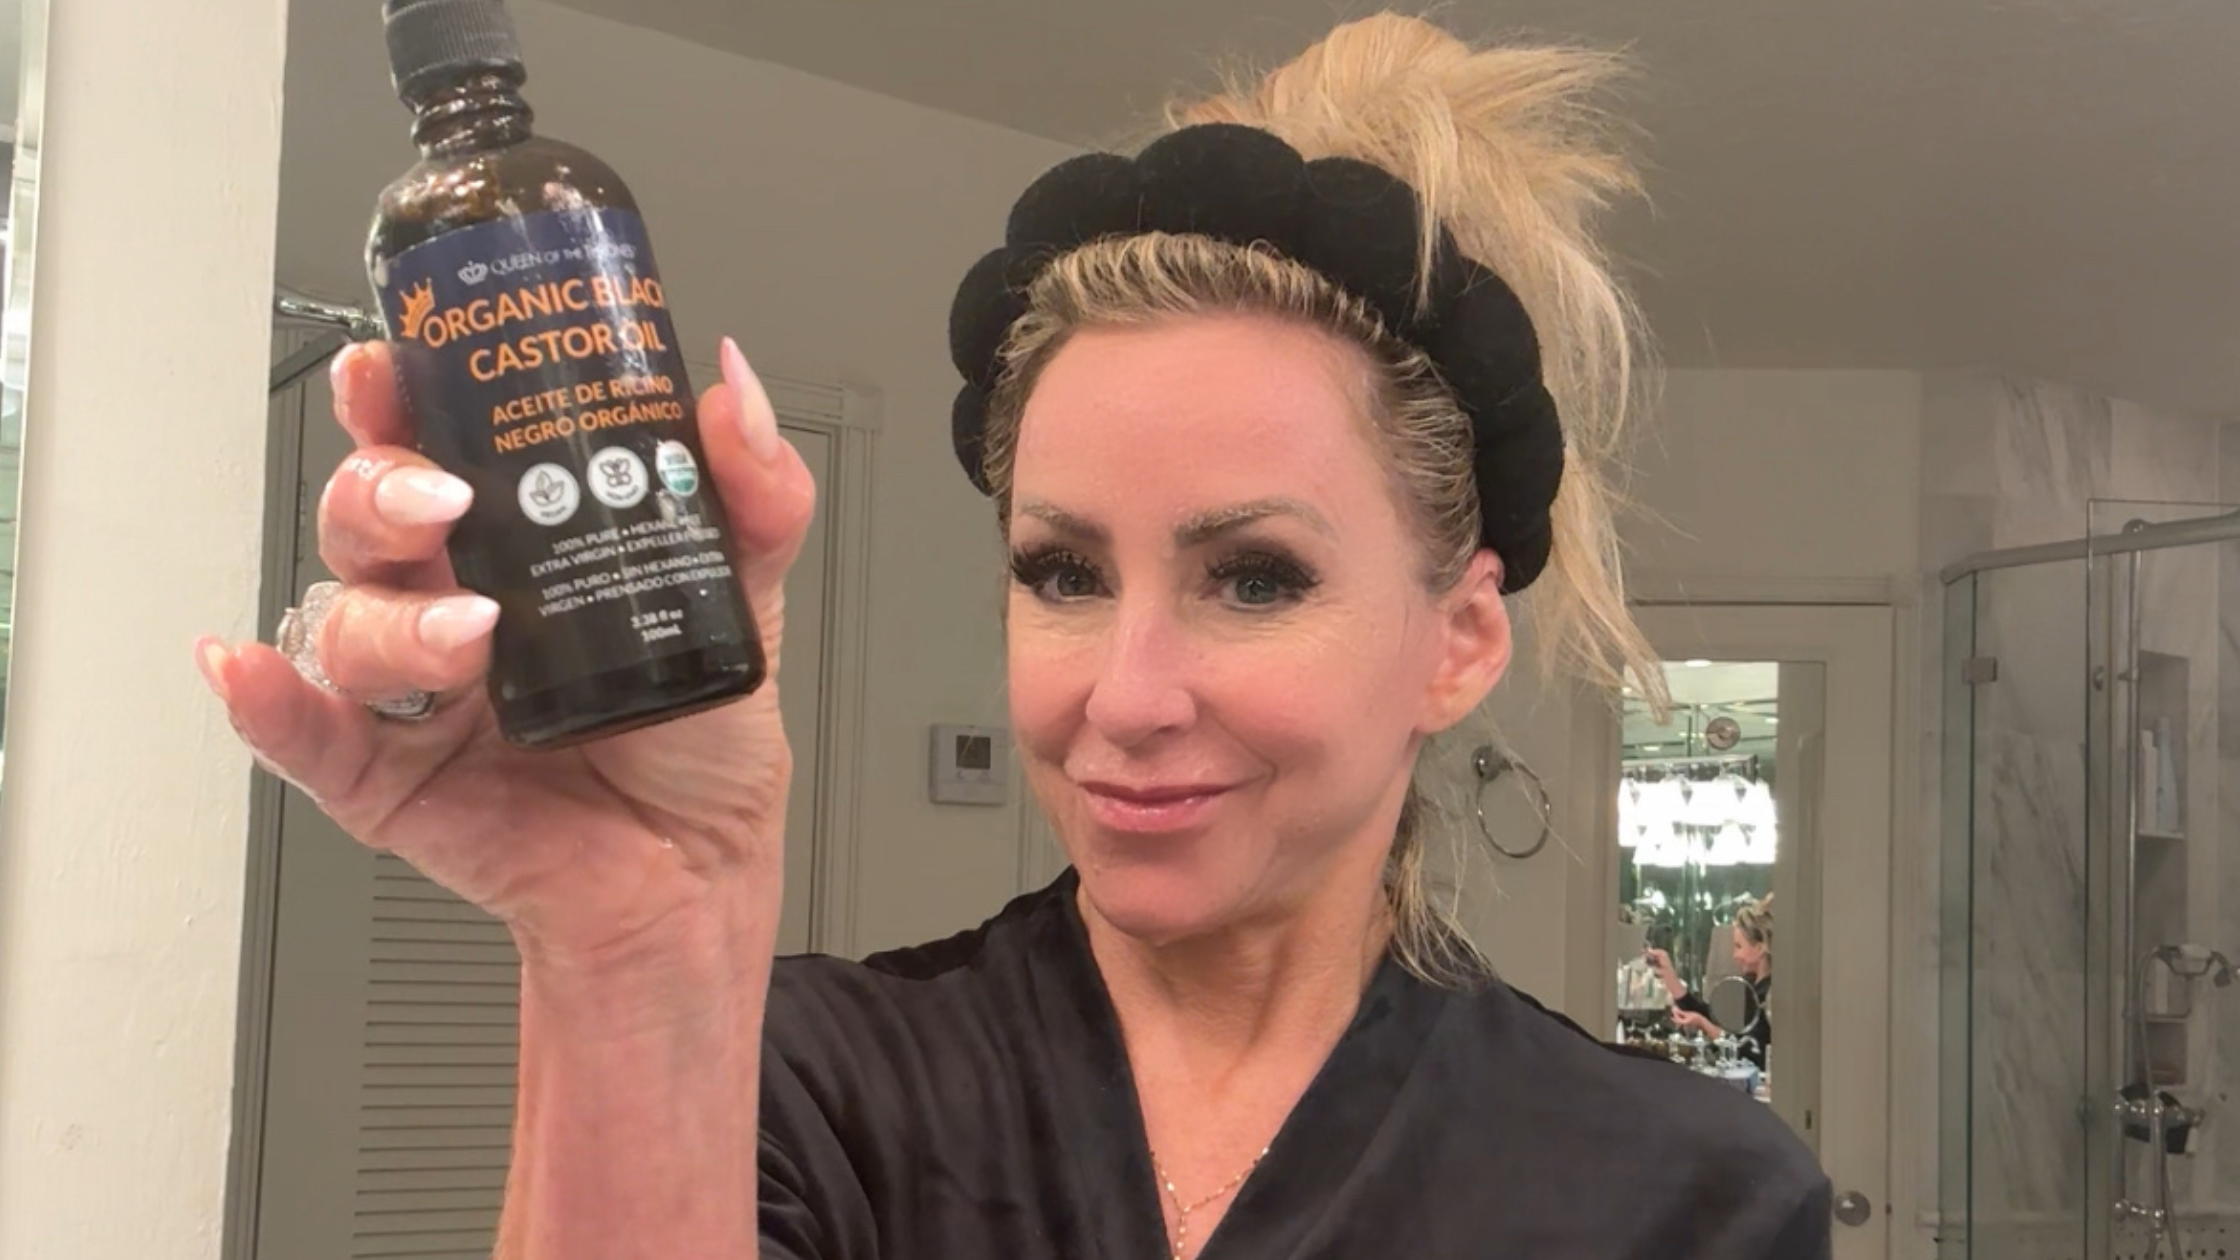 Chalene Johnson Queen Of Thrones Castor Oil for a Tighter Jawline